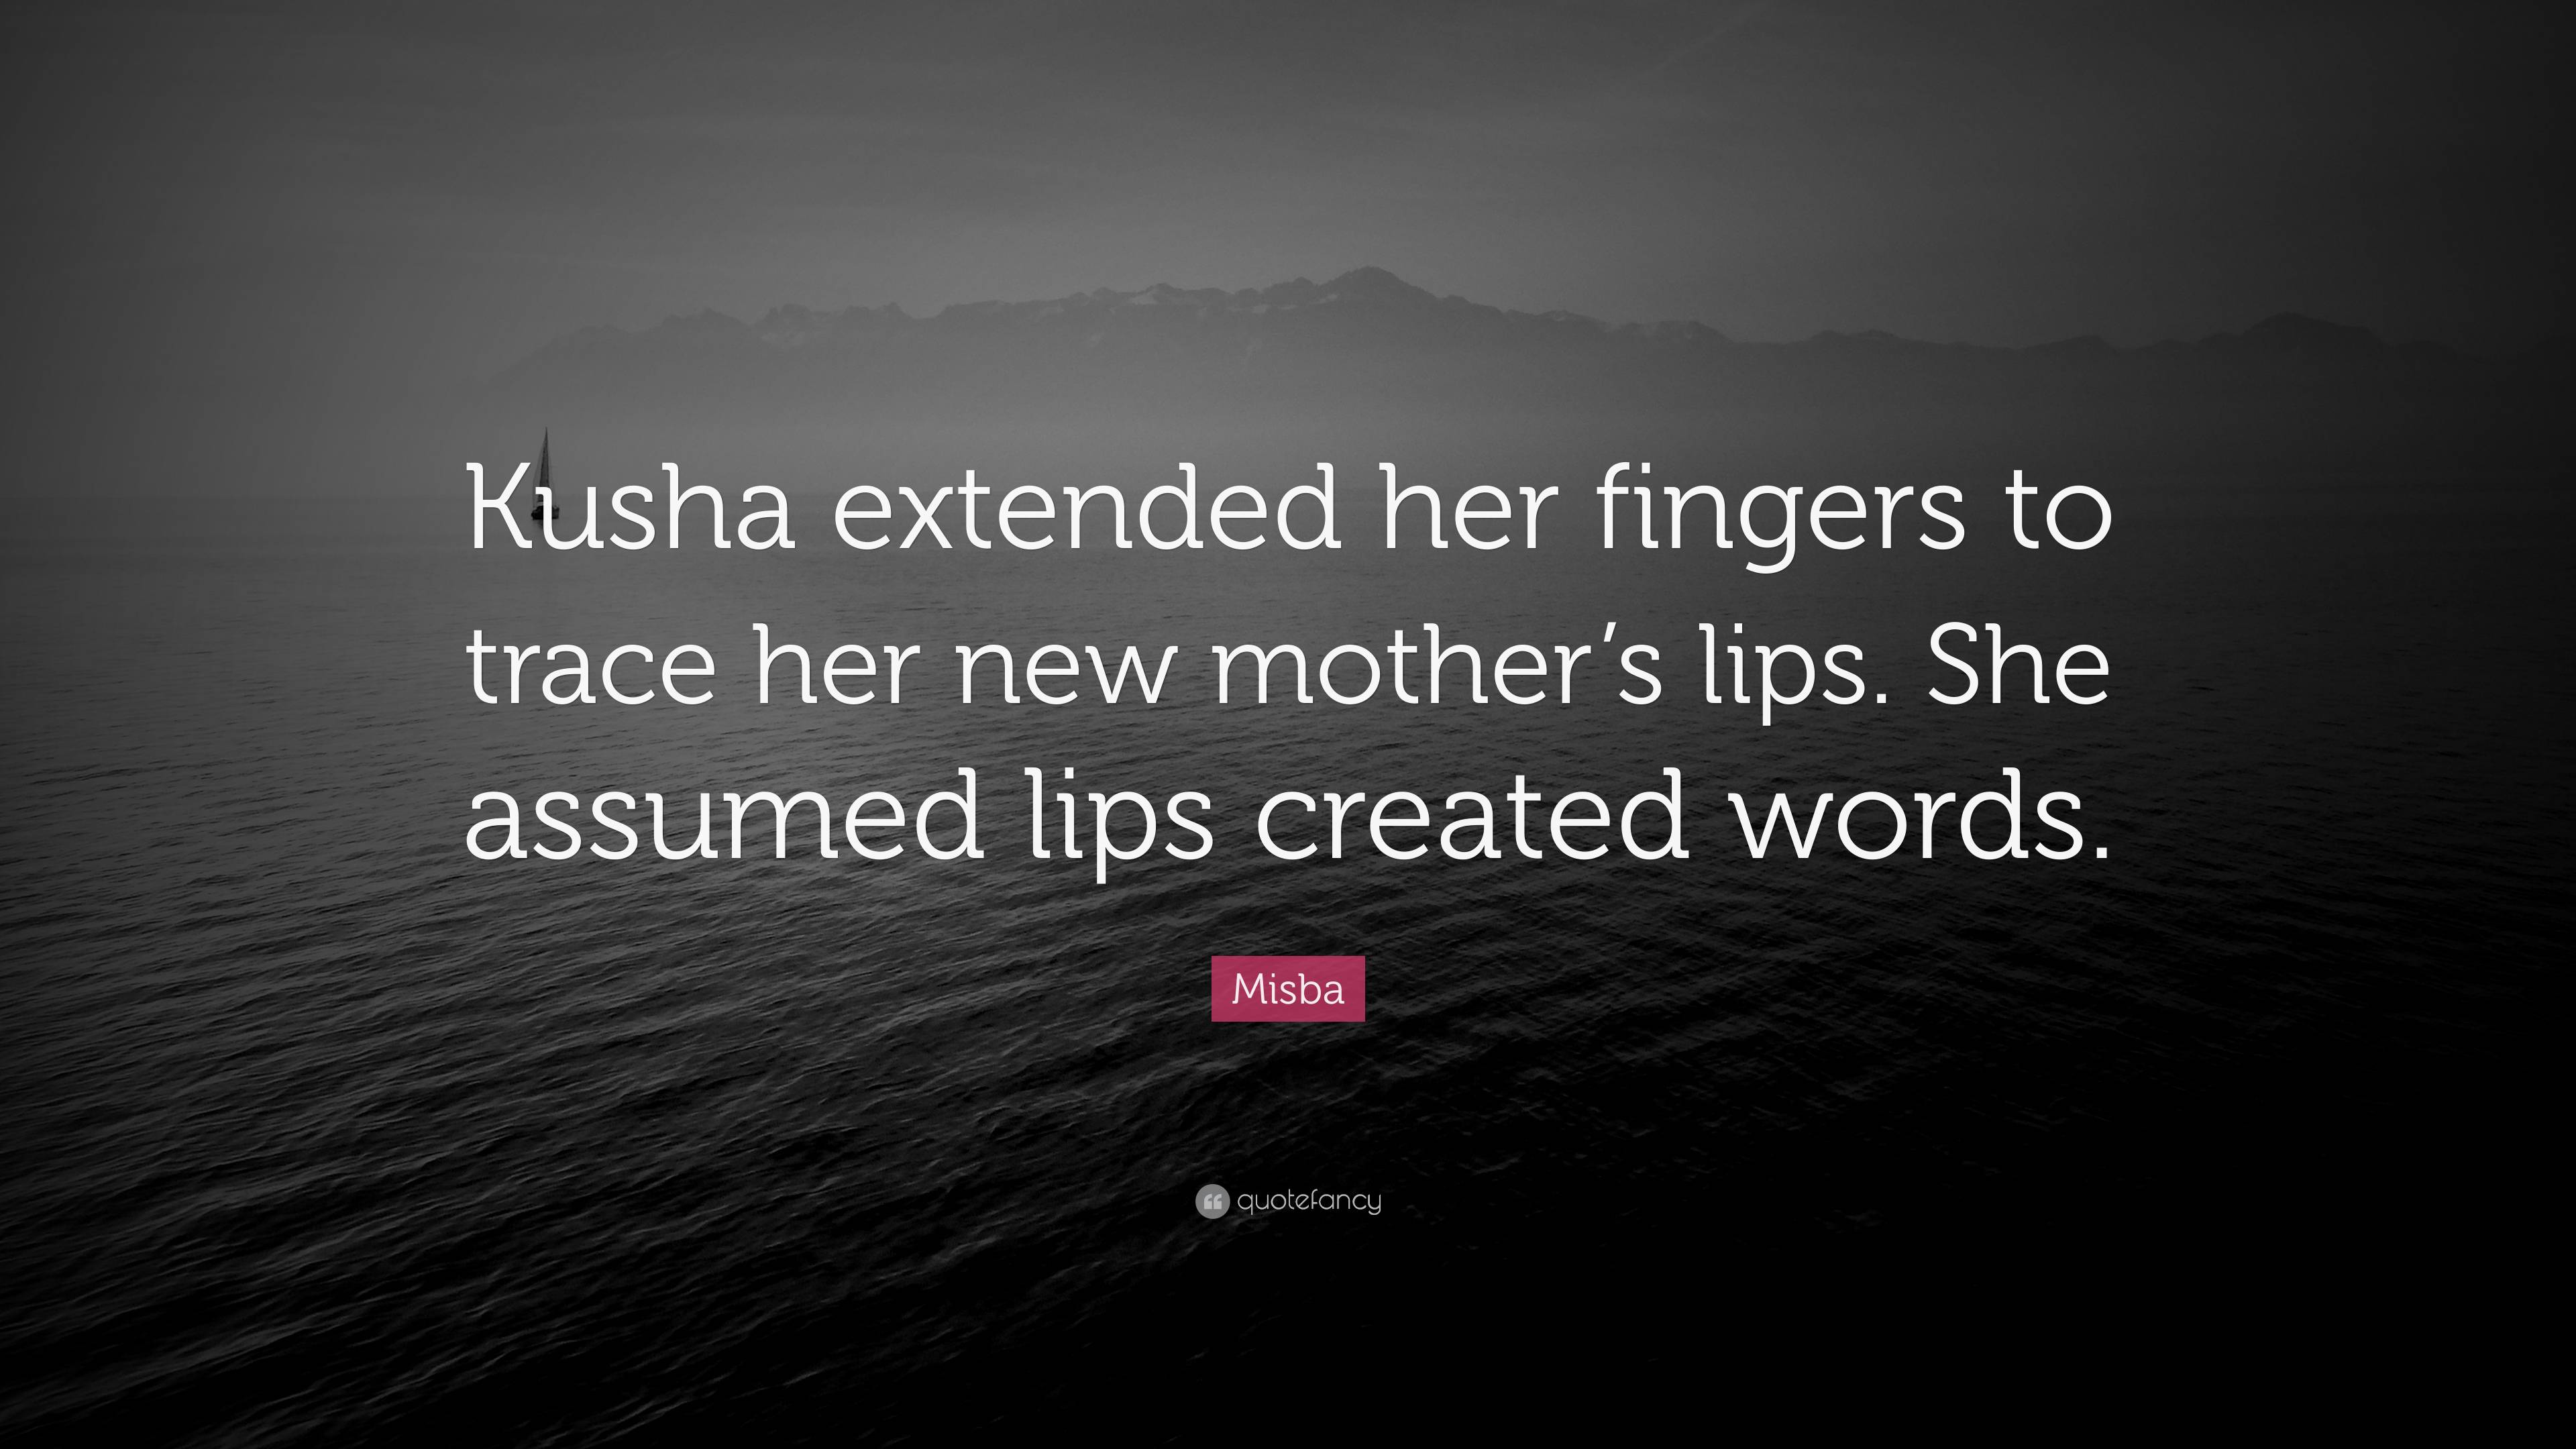 Misba Quote “kusha Extended Her Fingers To Trace Her New Mother S Lips She Assumed Lips